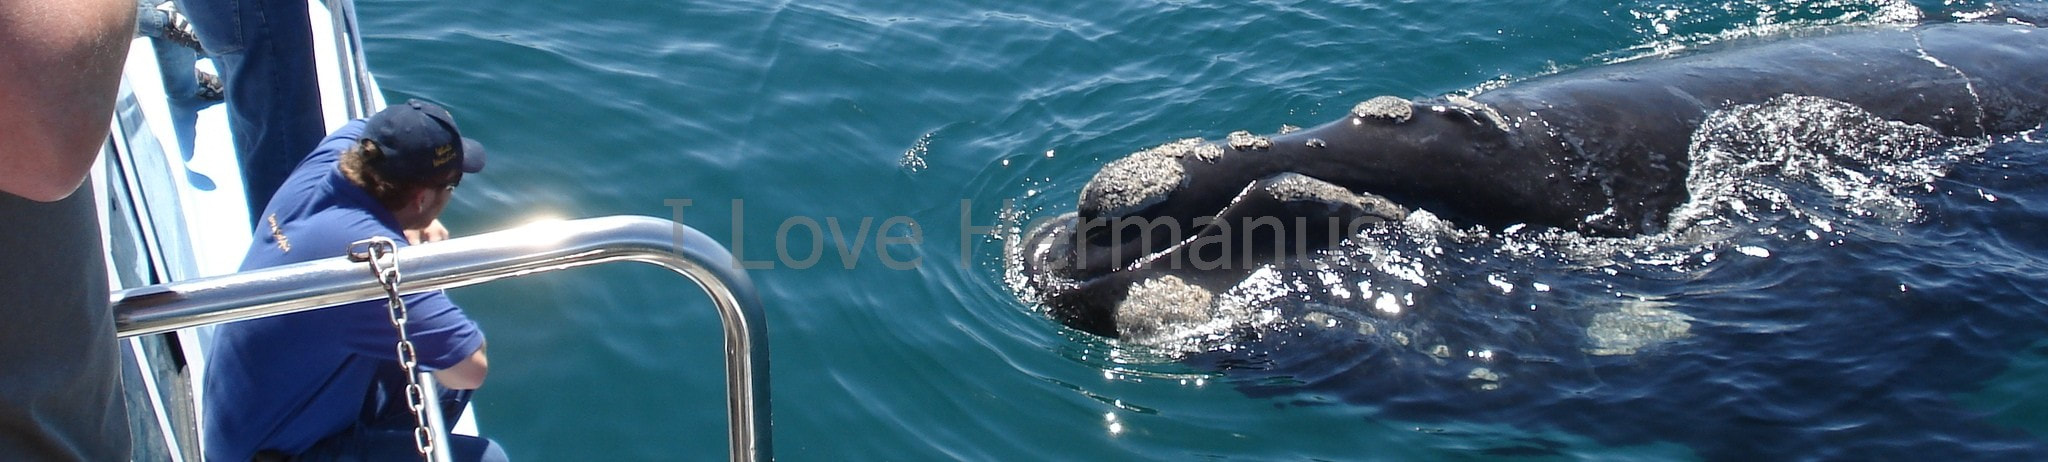 Whale watching boat trips, Hermanus, South Africa